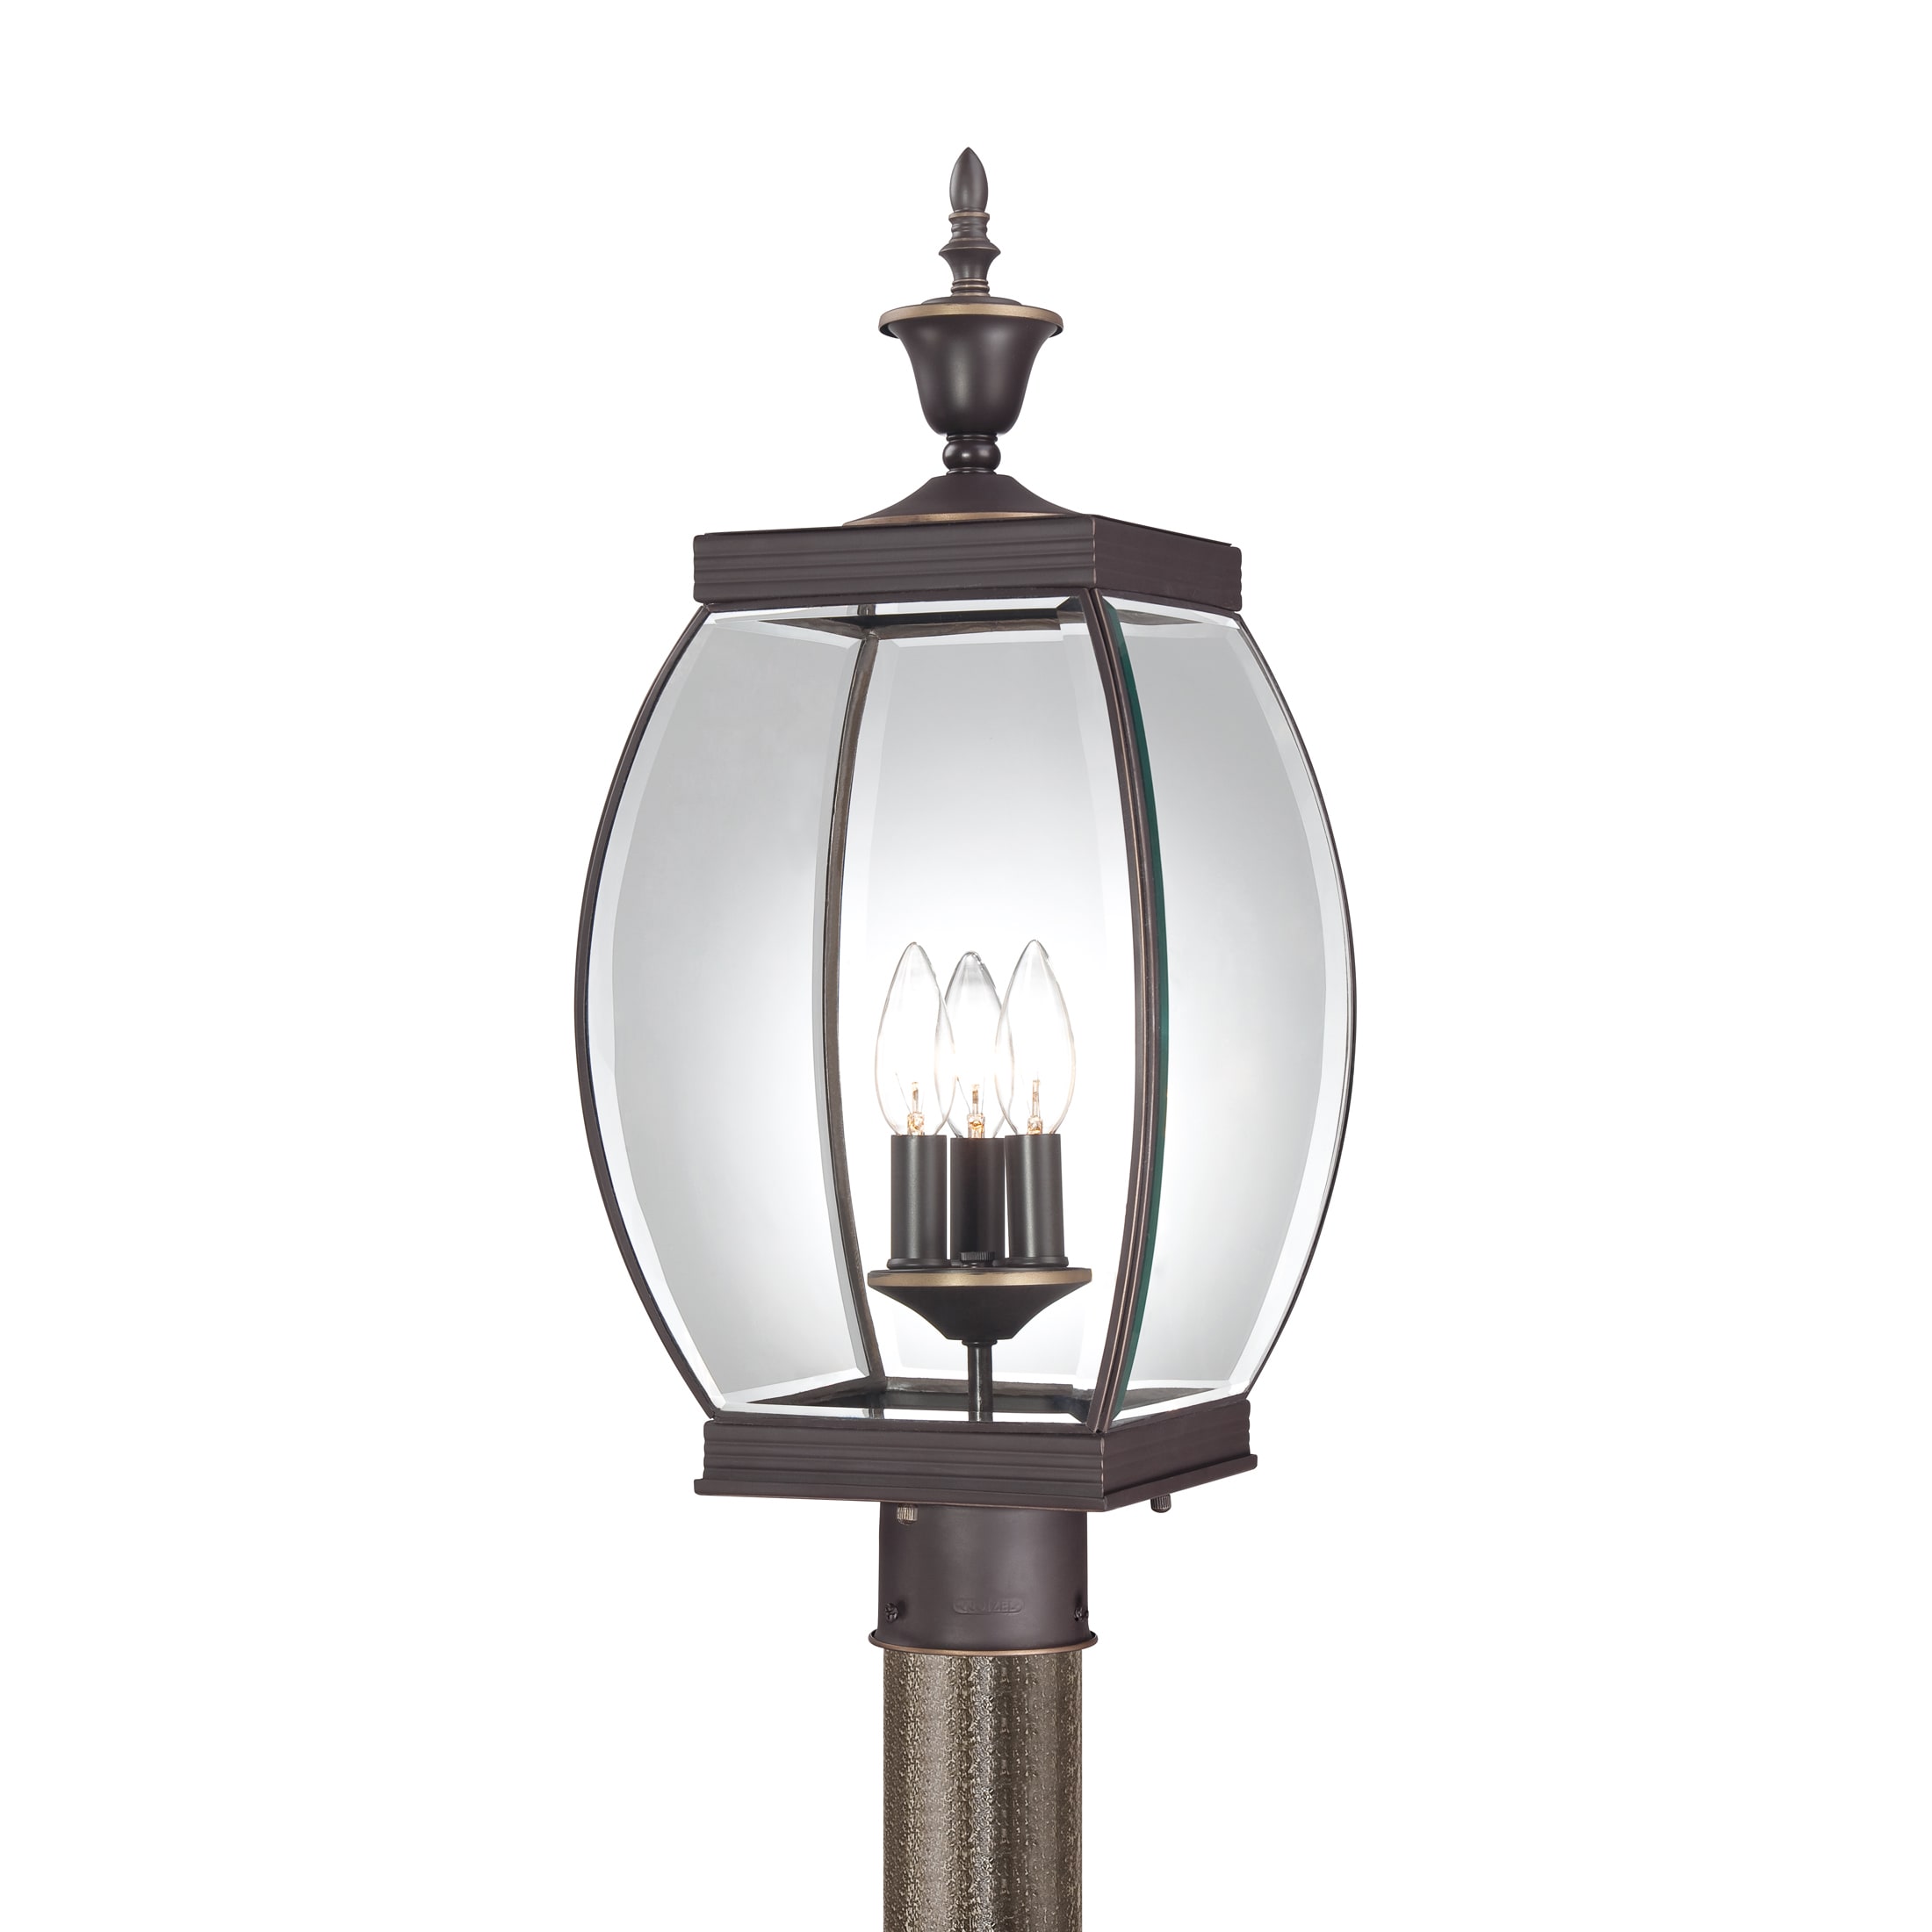 Quoizel Oasis 3 light 60 watt Outdoor Fixture (Brass Finish Medici bronze Number of lights Three (3)Shade Trumpeted glassRequires three (3) 60 watt B10 candelabra base bulbs (not included)Dimensions 22 inches high x 9 inches deepWeight 9 poundsThis f